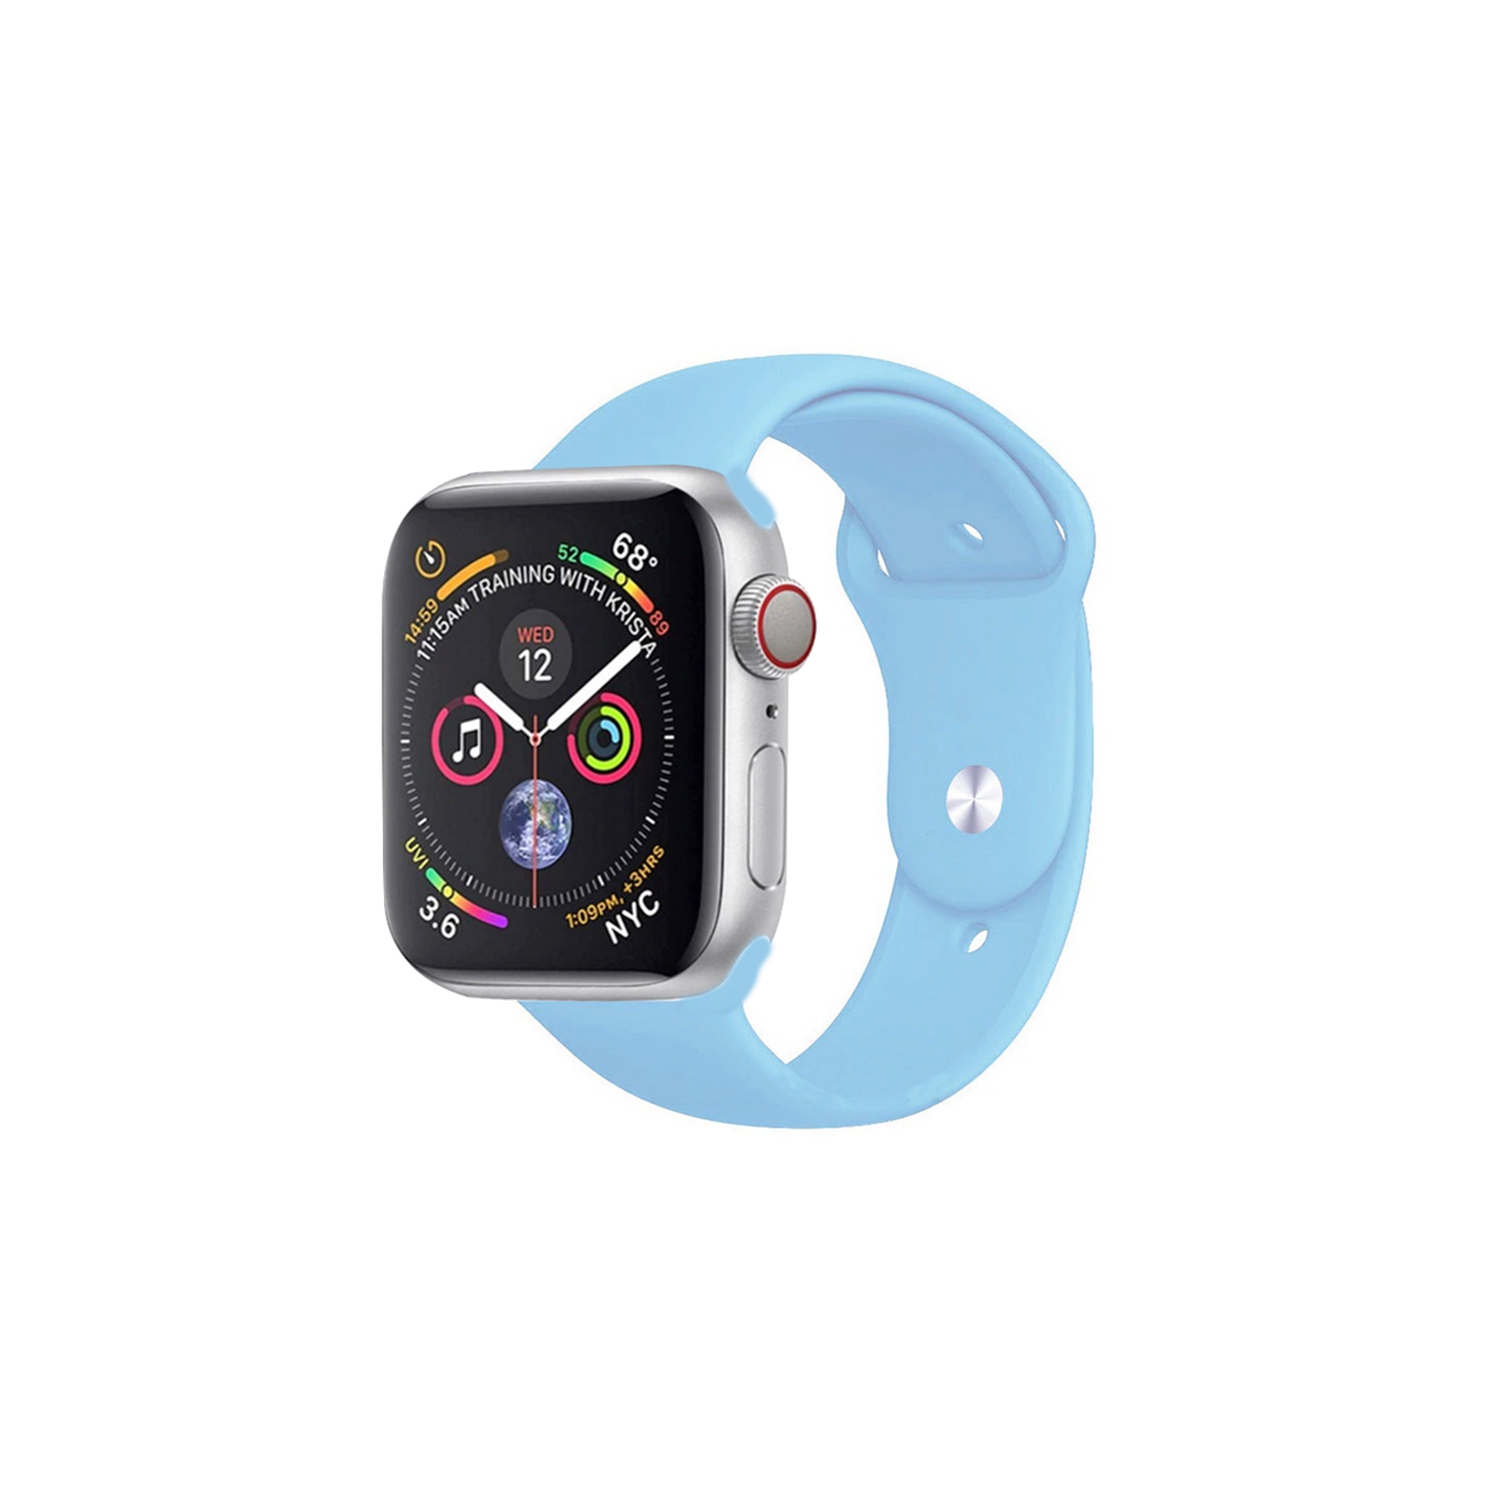 Watch Strap Silicone Sports Band Bracelet M/L Size For Apple iWatch Series 42mm/44mm - Light Blue